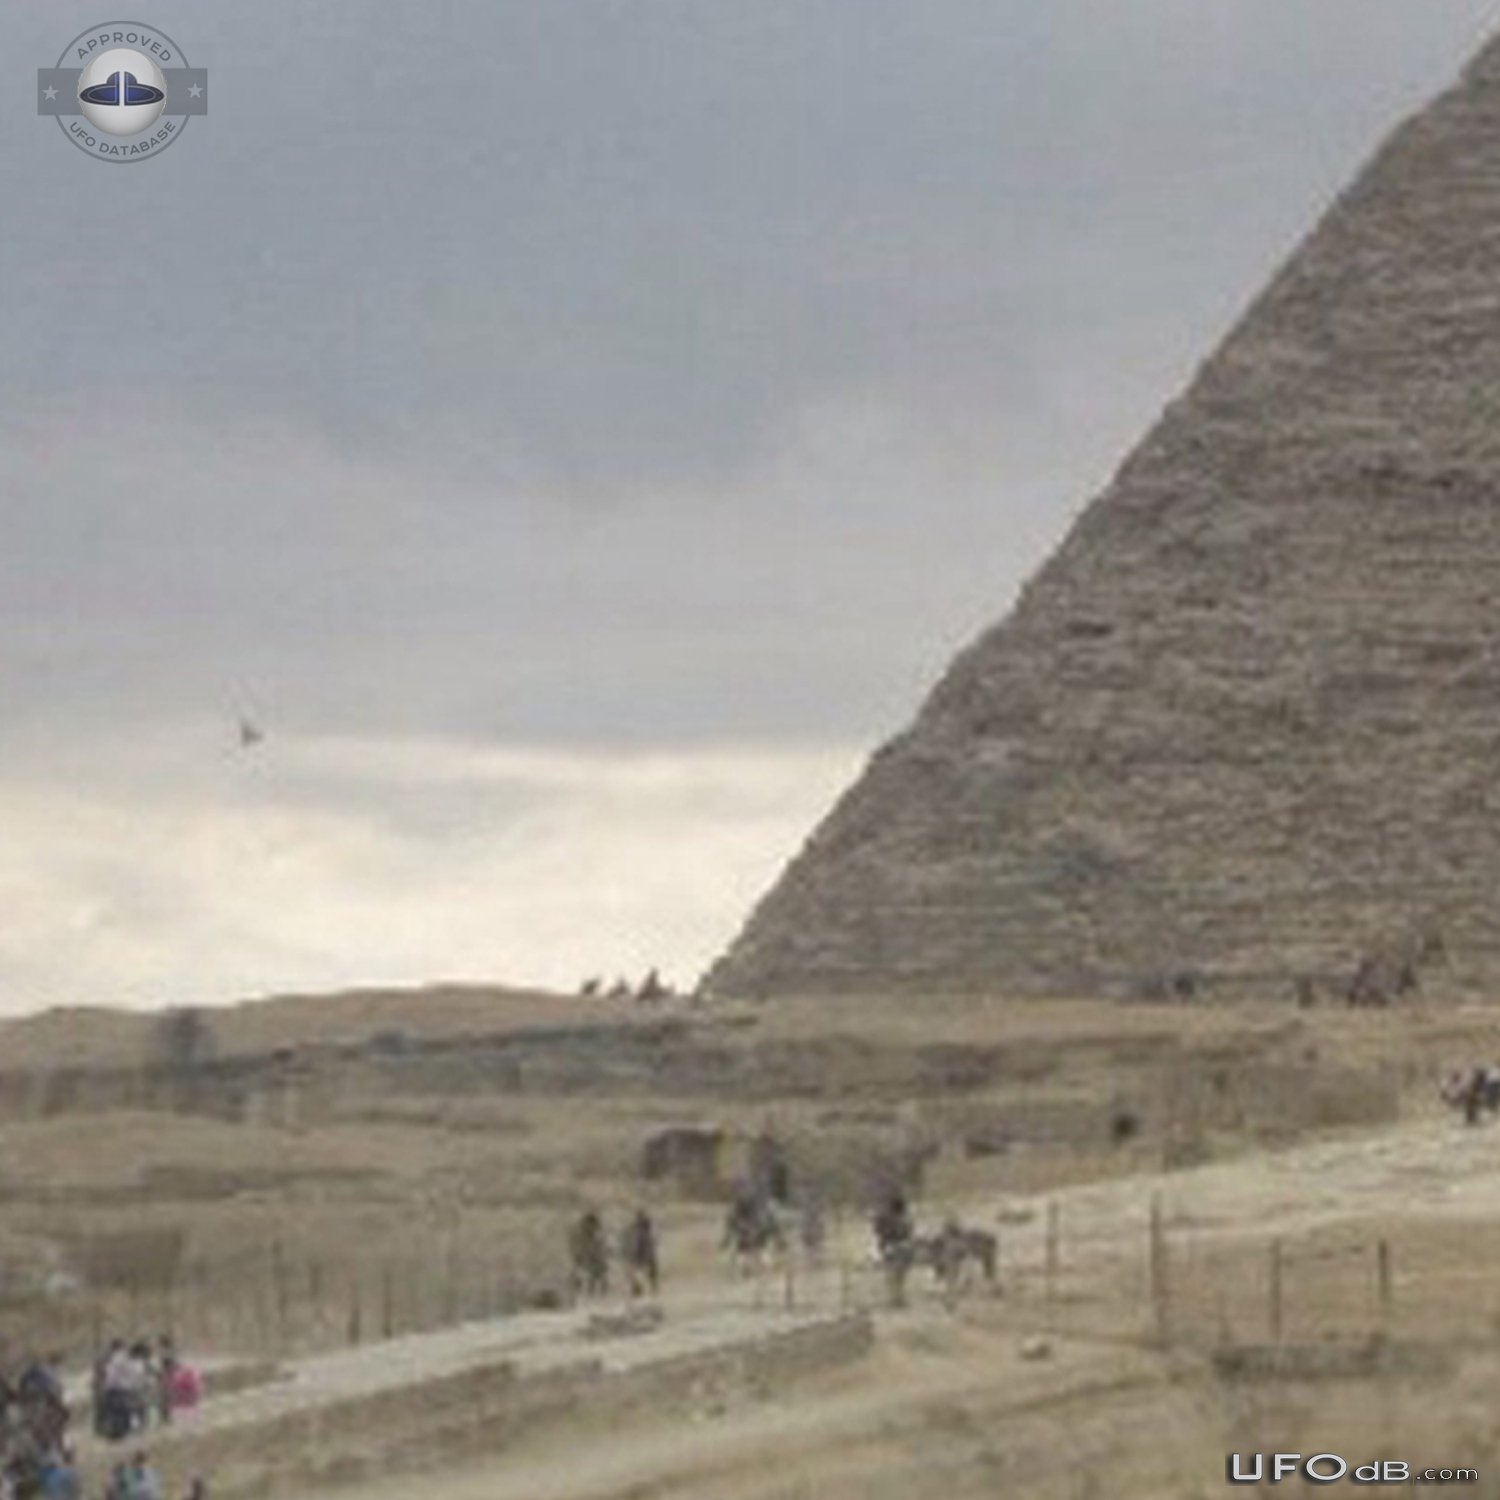 Picture reveal Triangular UFO on the left of a Pyramid in Egypt - 2011 UFO Picture #657-4